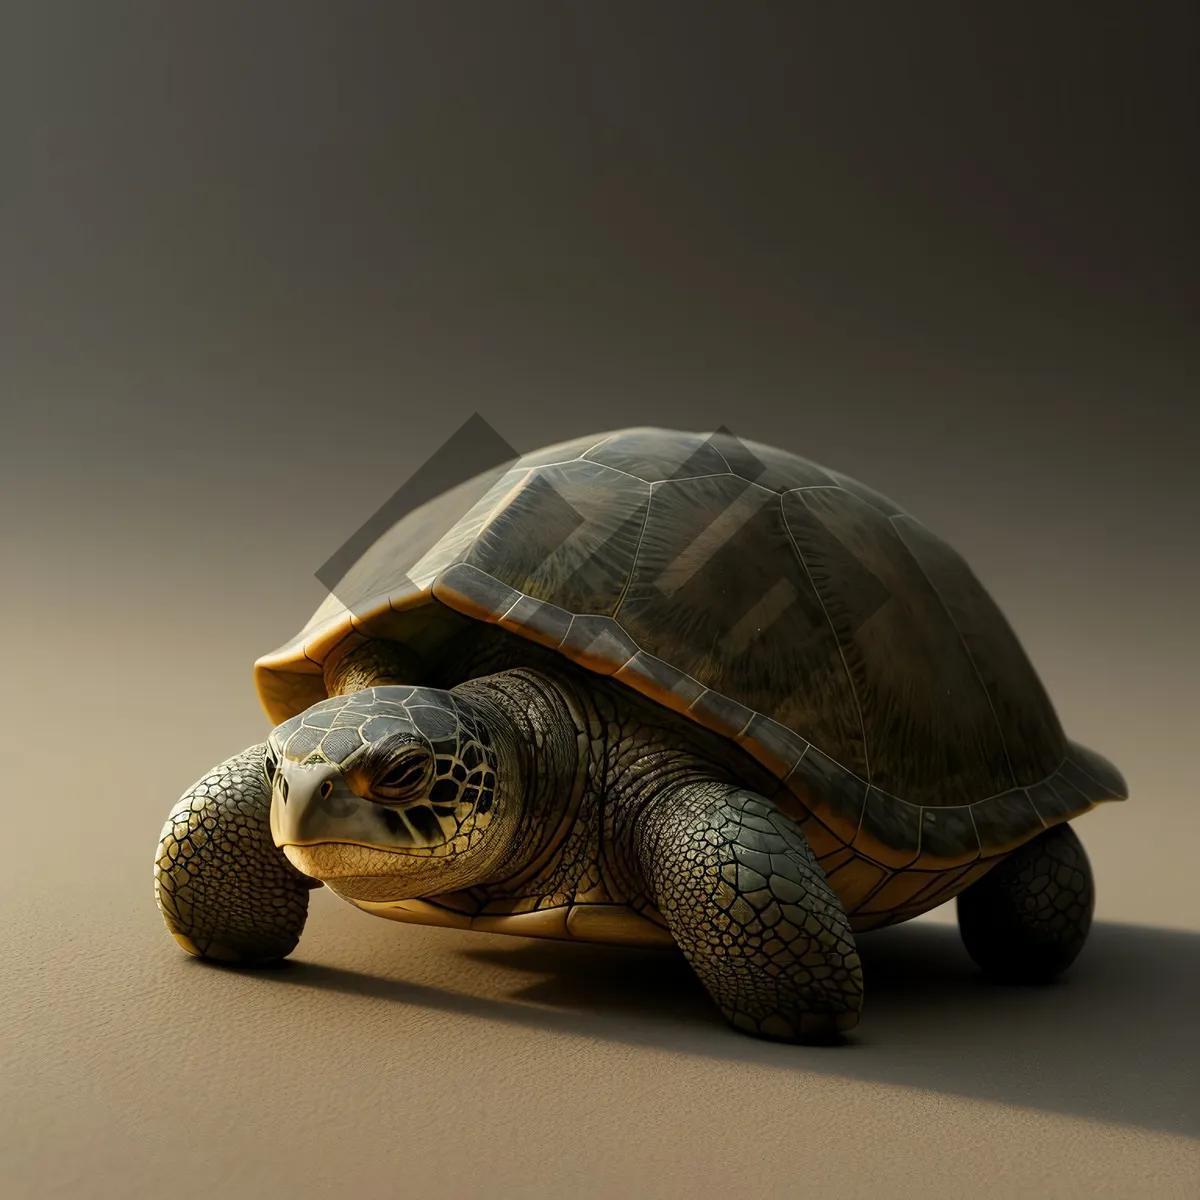 Picture of Terrapin Tortoise: Majestic Reptile in Protective Shell